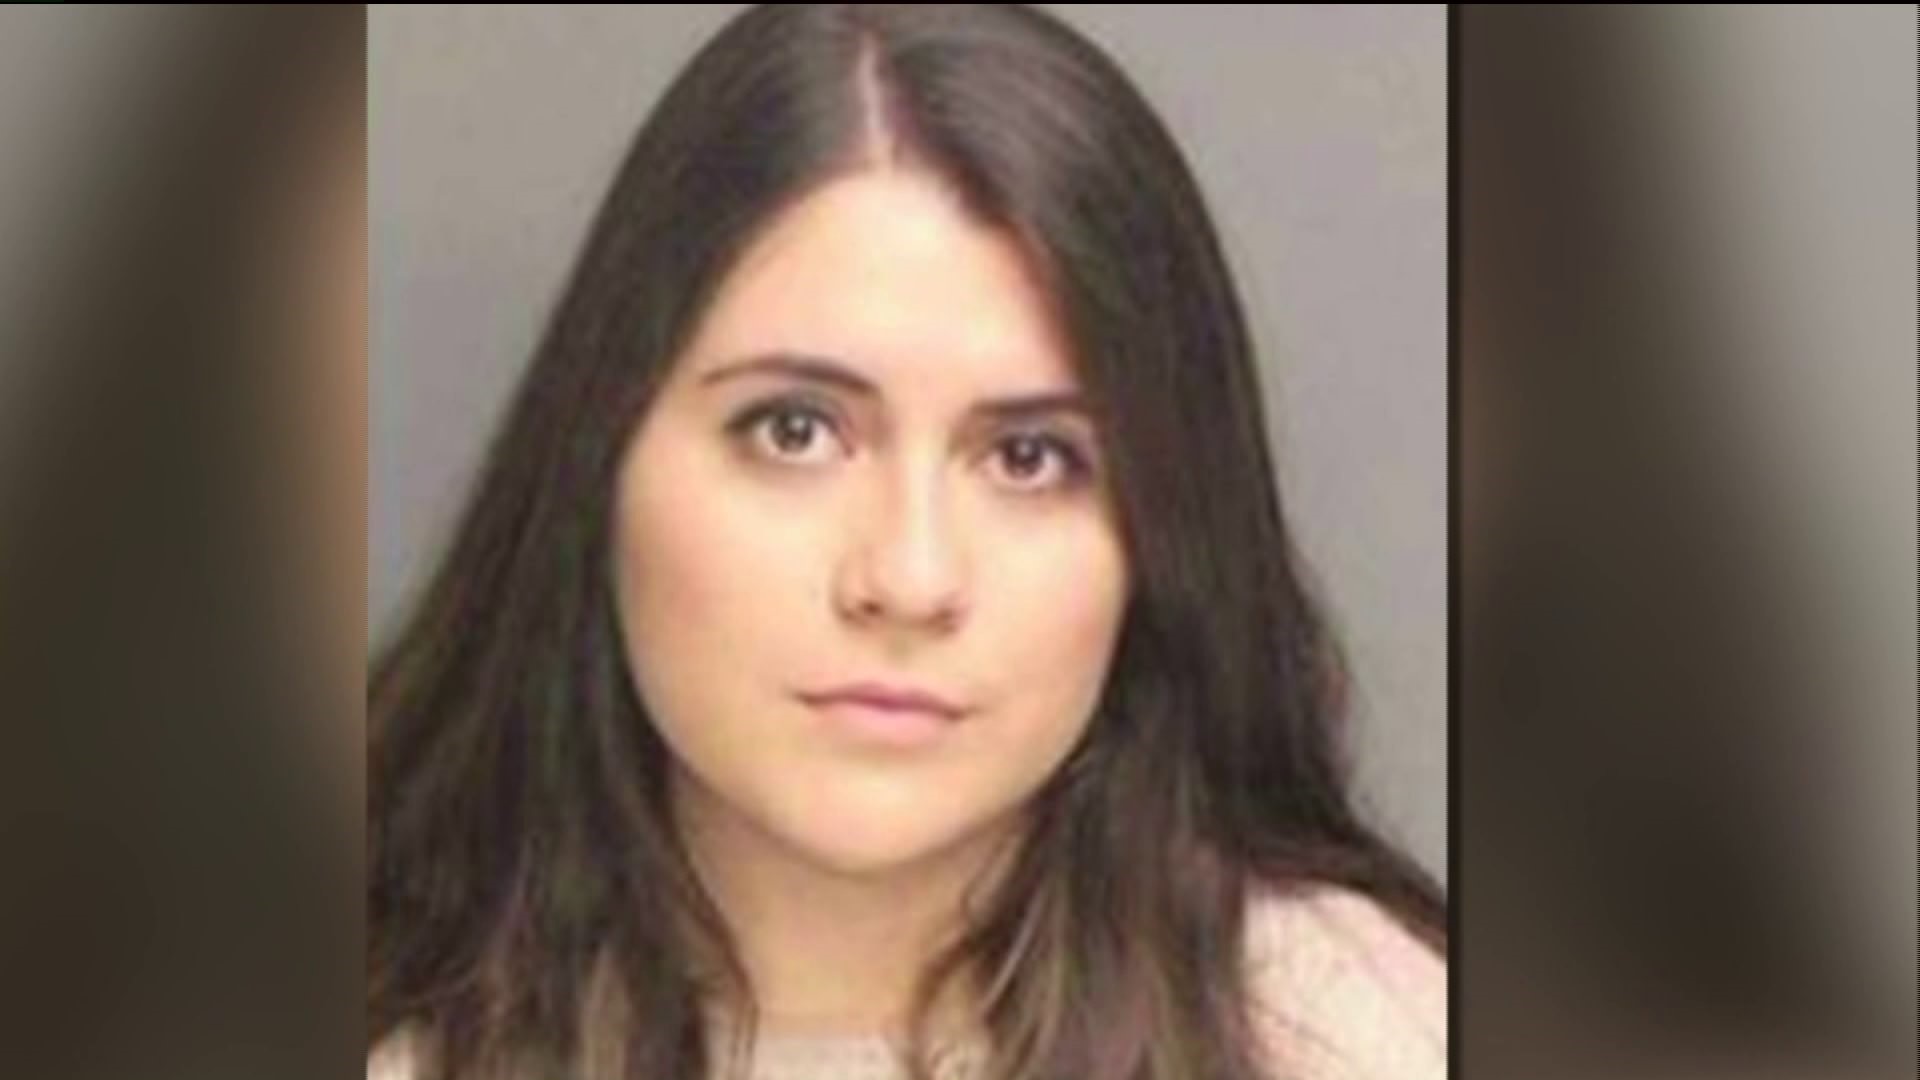 Police: Woman fears losing potential lover, lies about rape by Sacred Heart football players